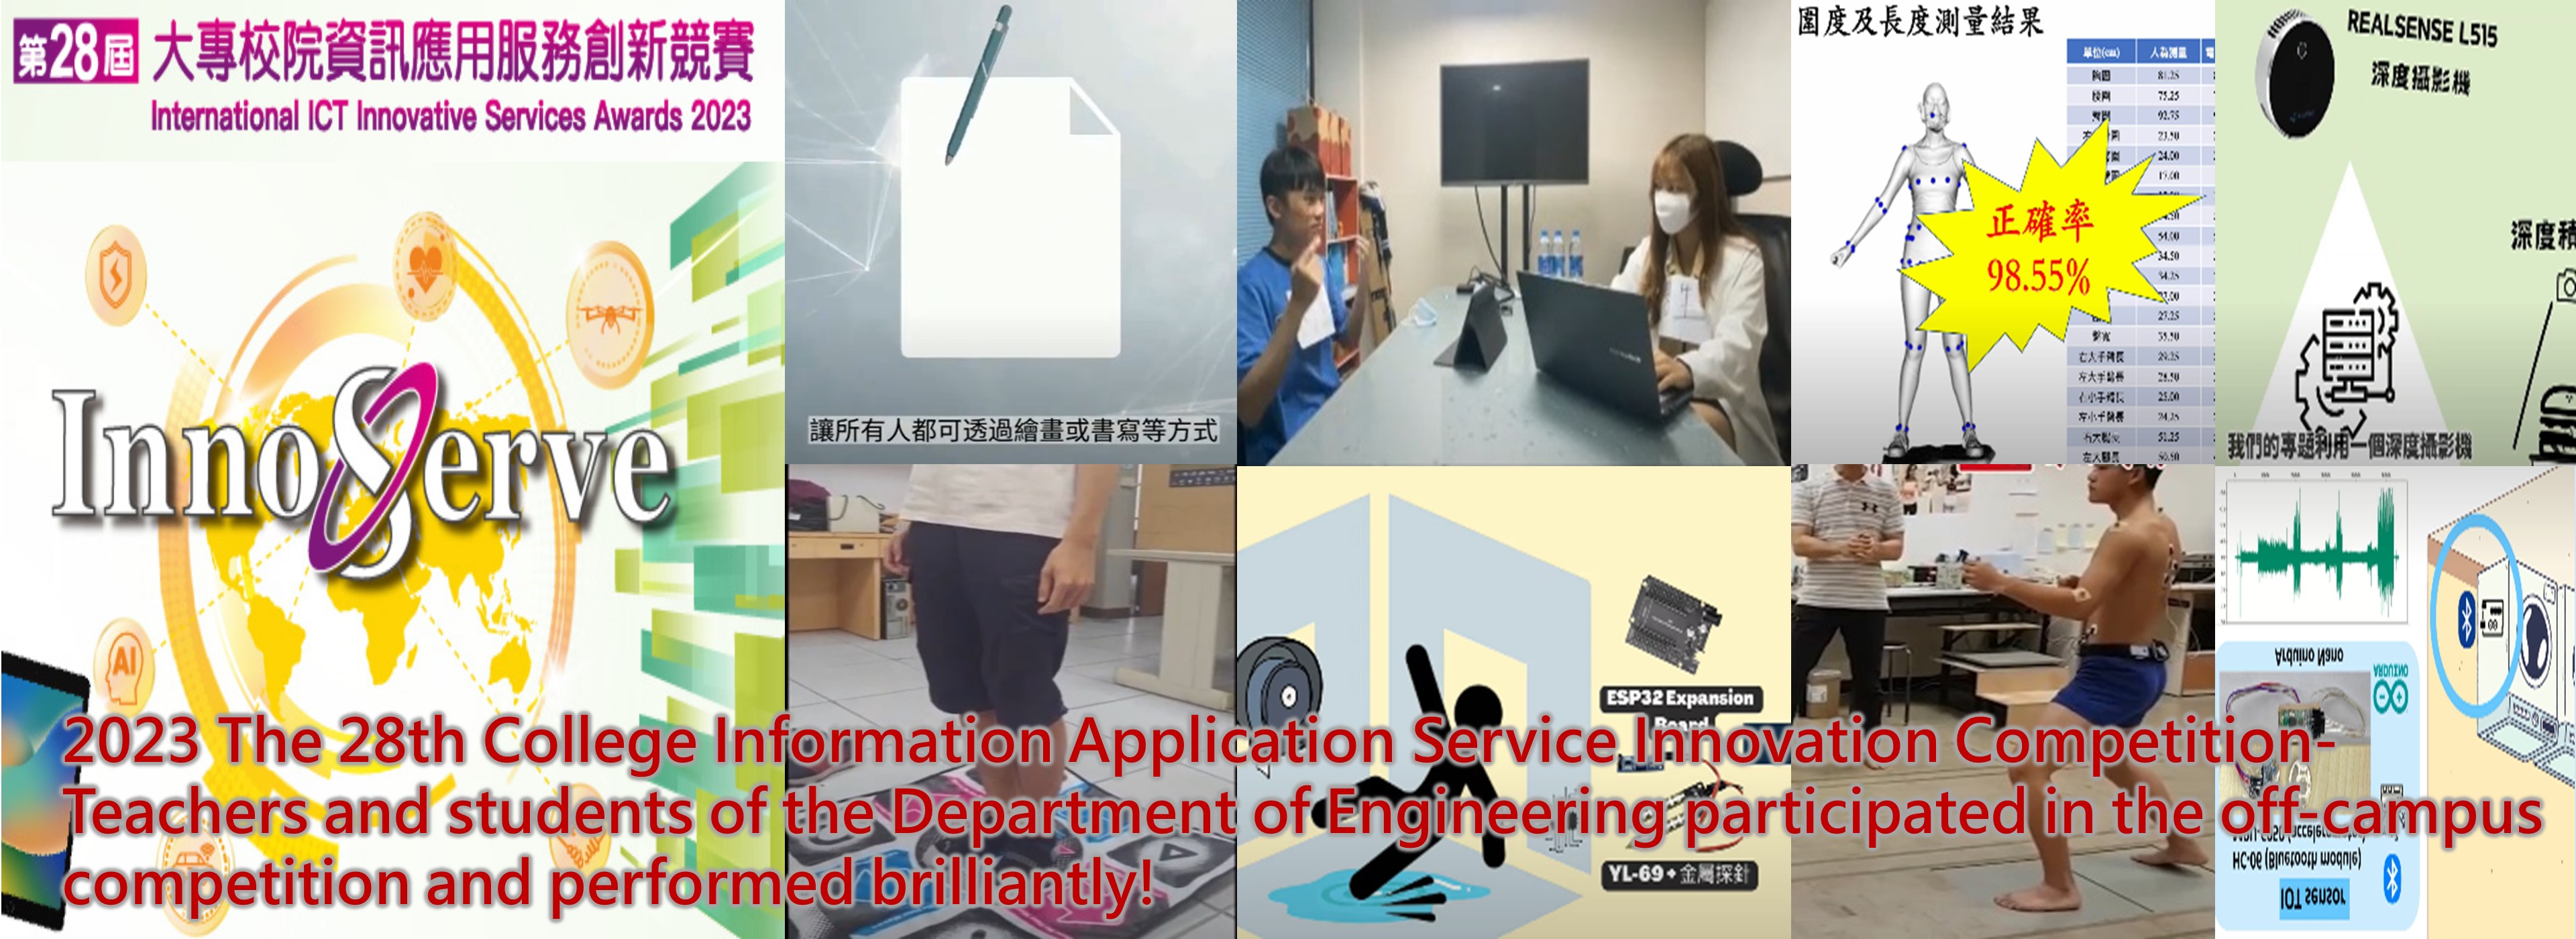 2023 The 28th College Information Application Service Innovation Competition